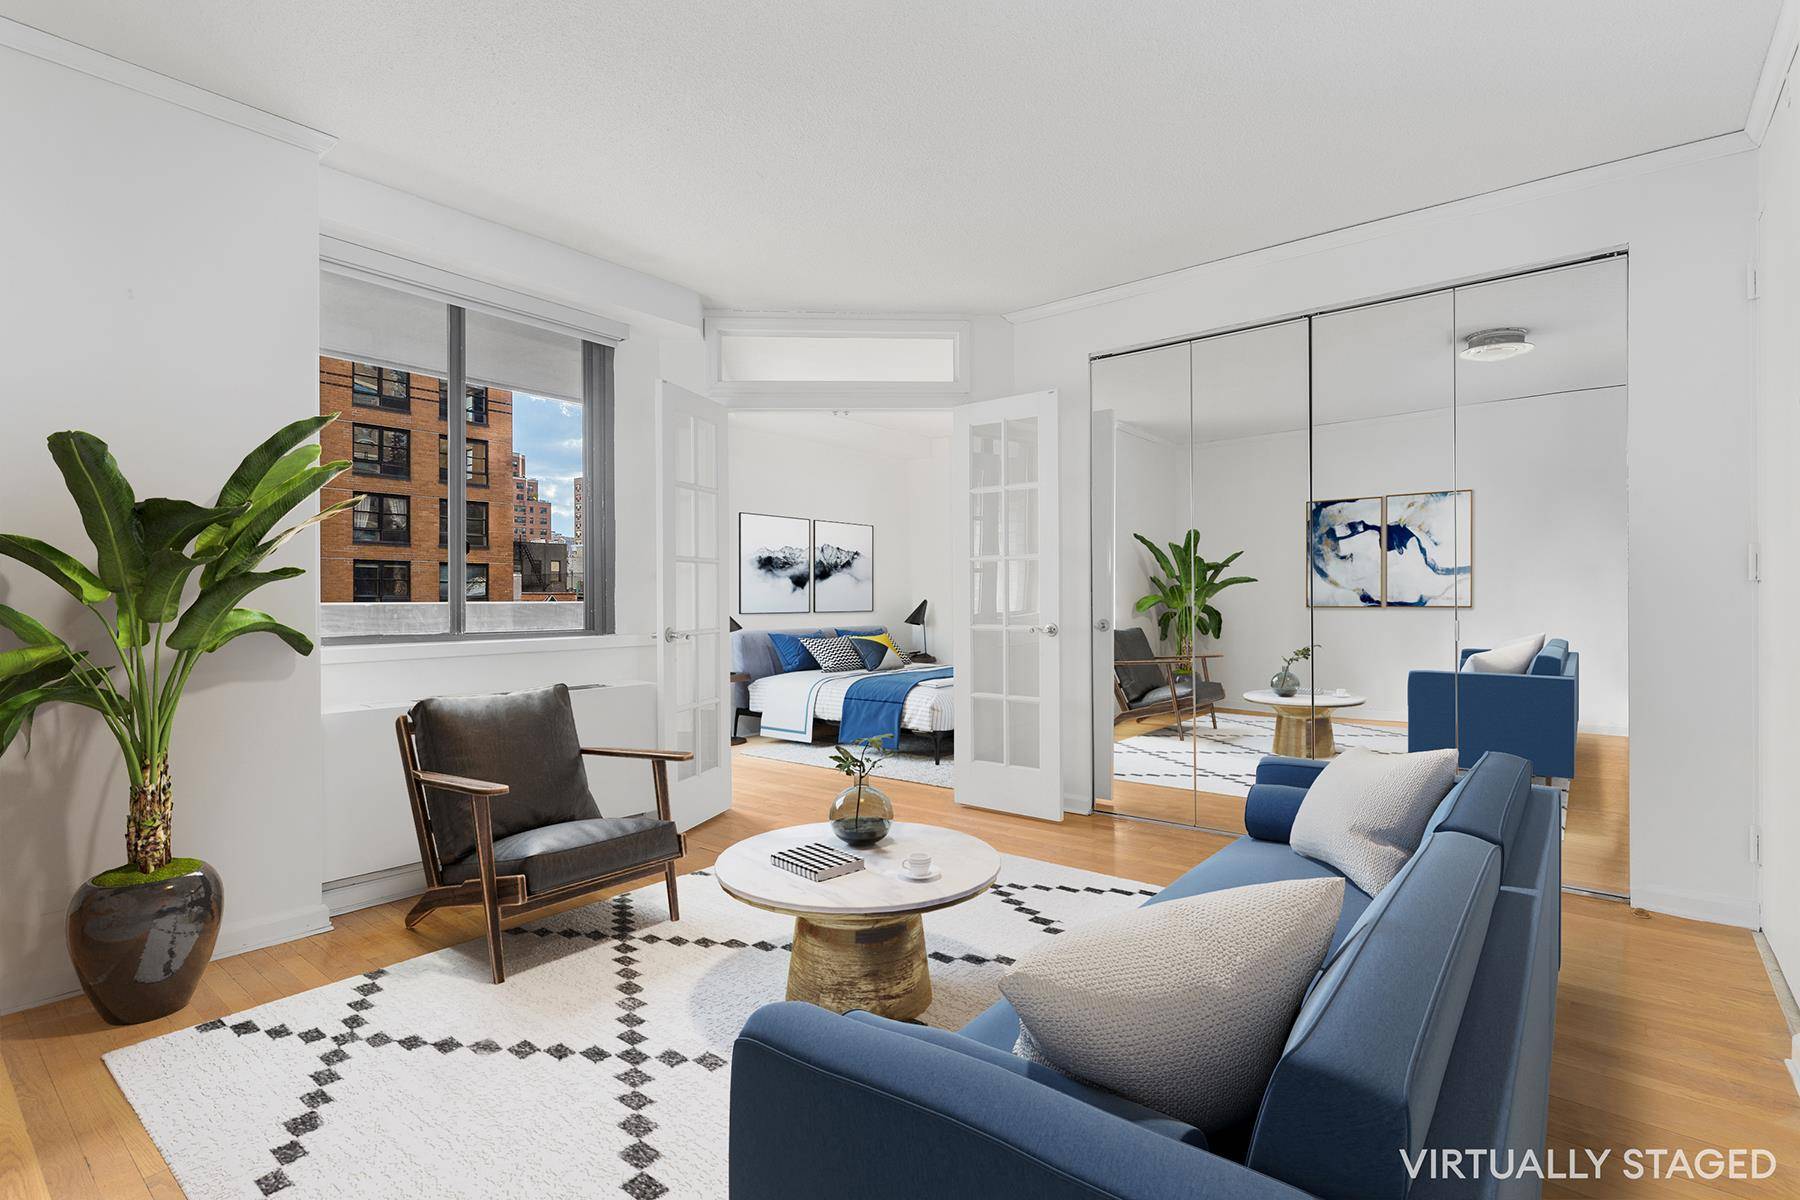 A beautiful studio set in the heart of the Upper East Side.